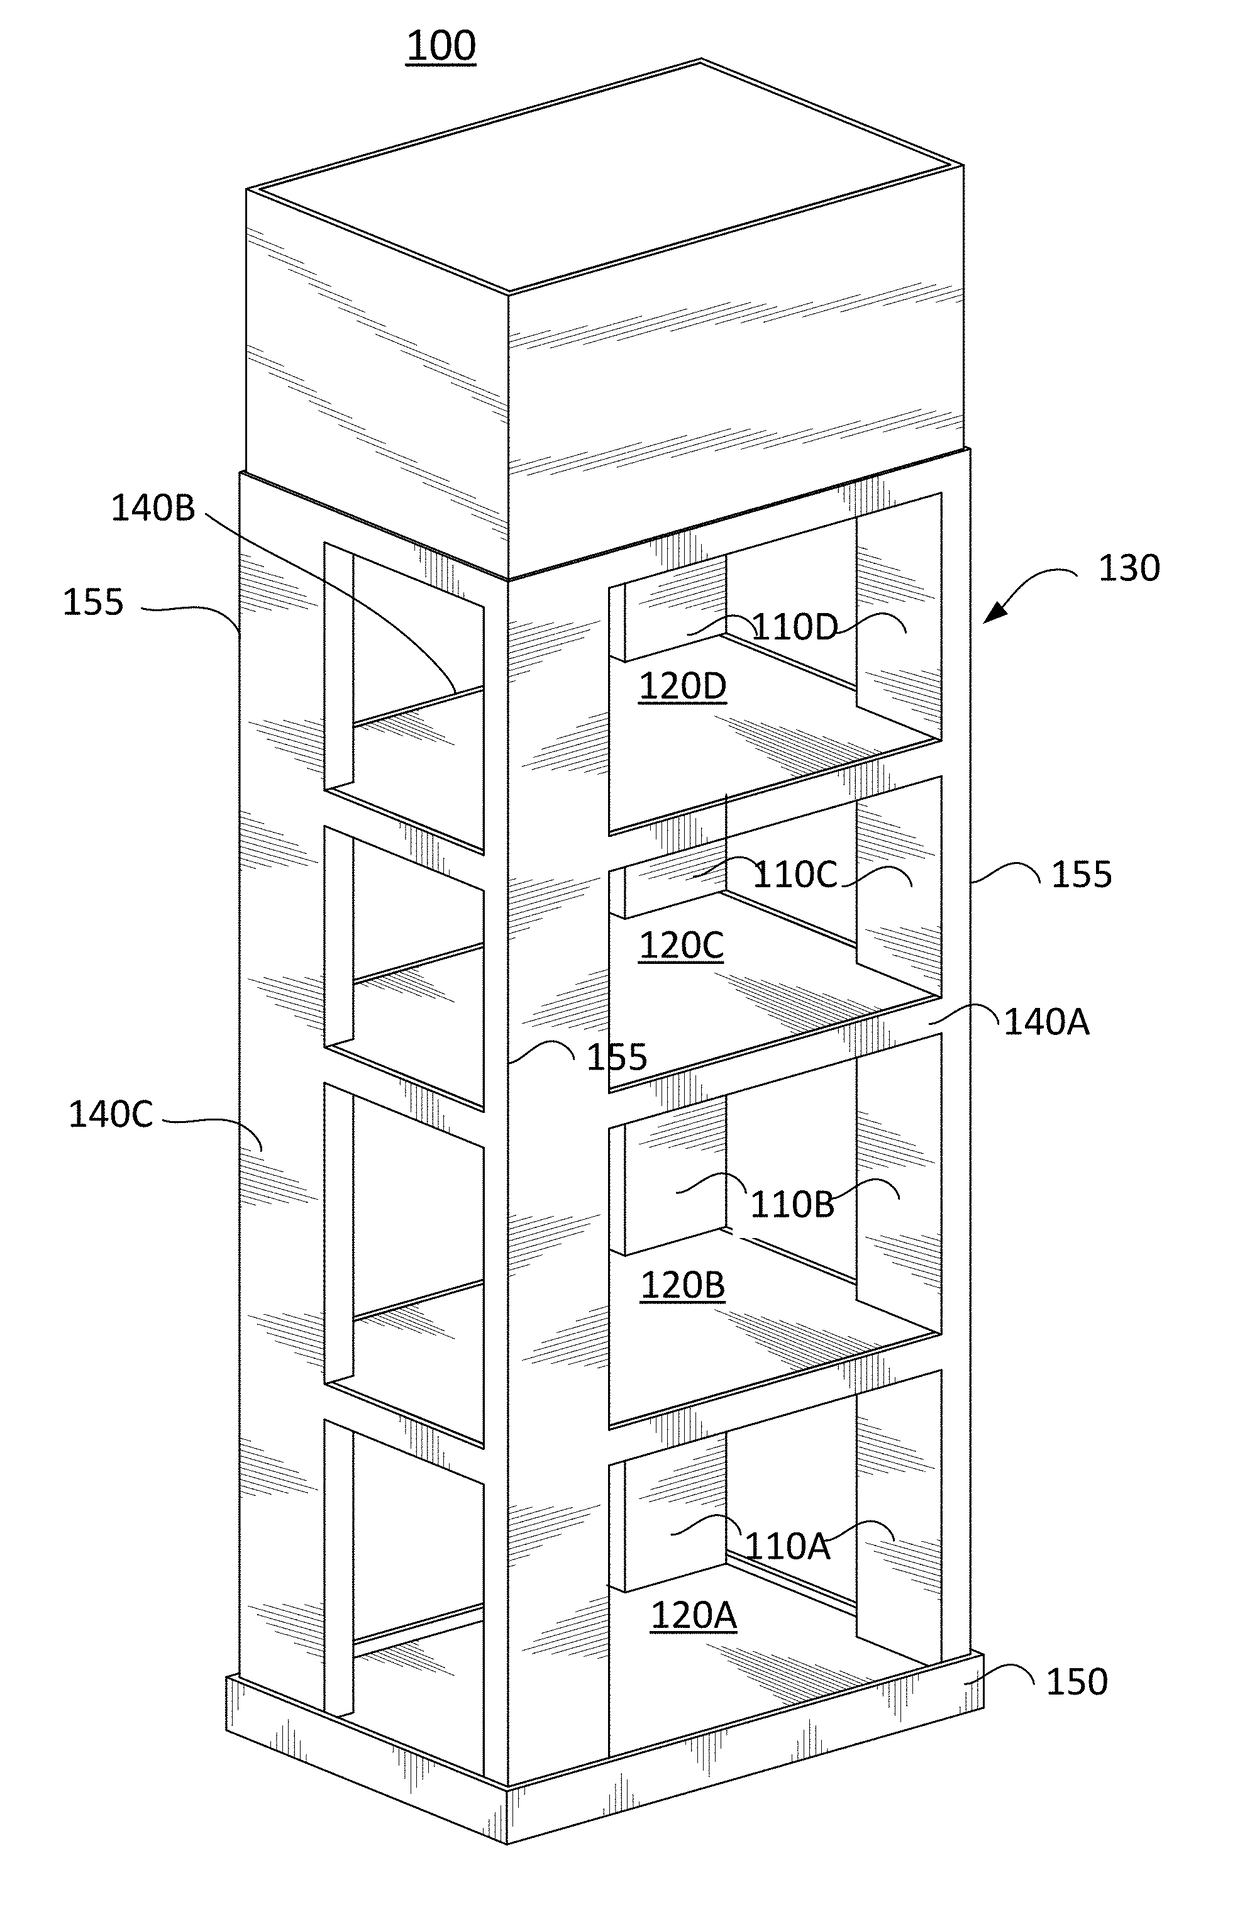 Display Unit with Built-in Shelving Supports